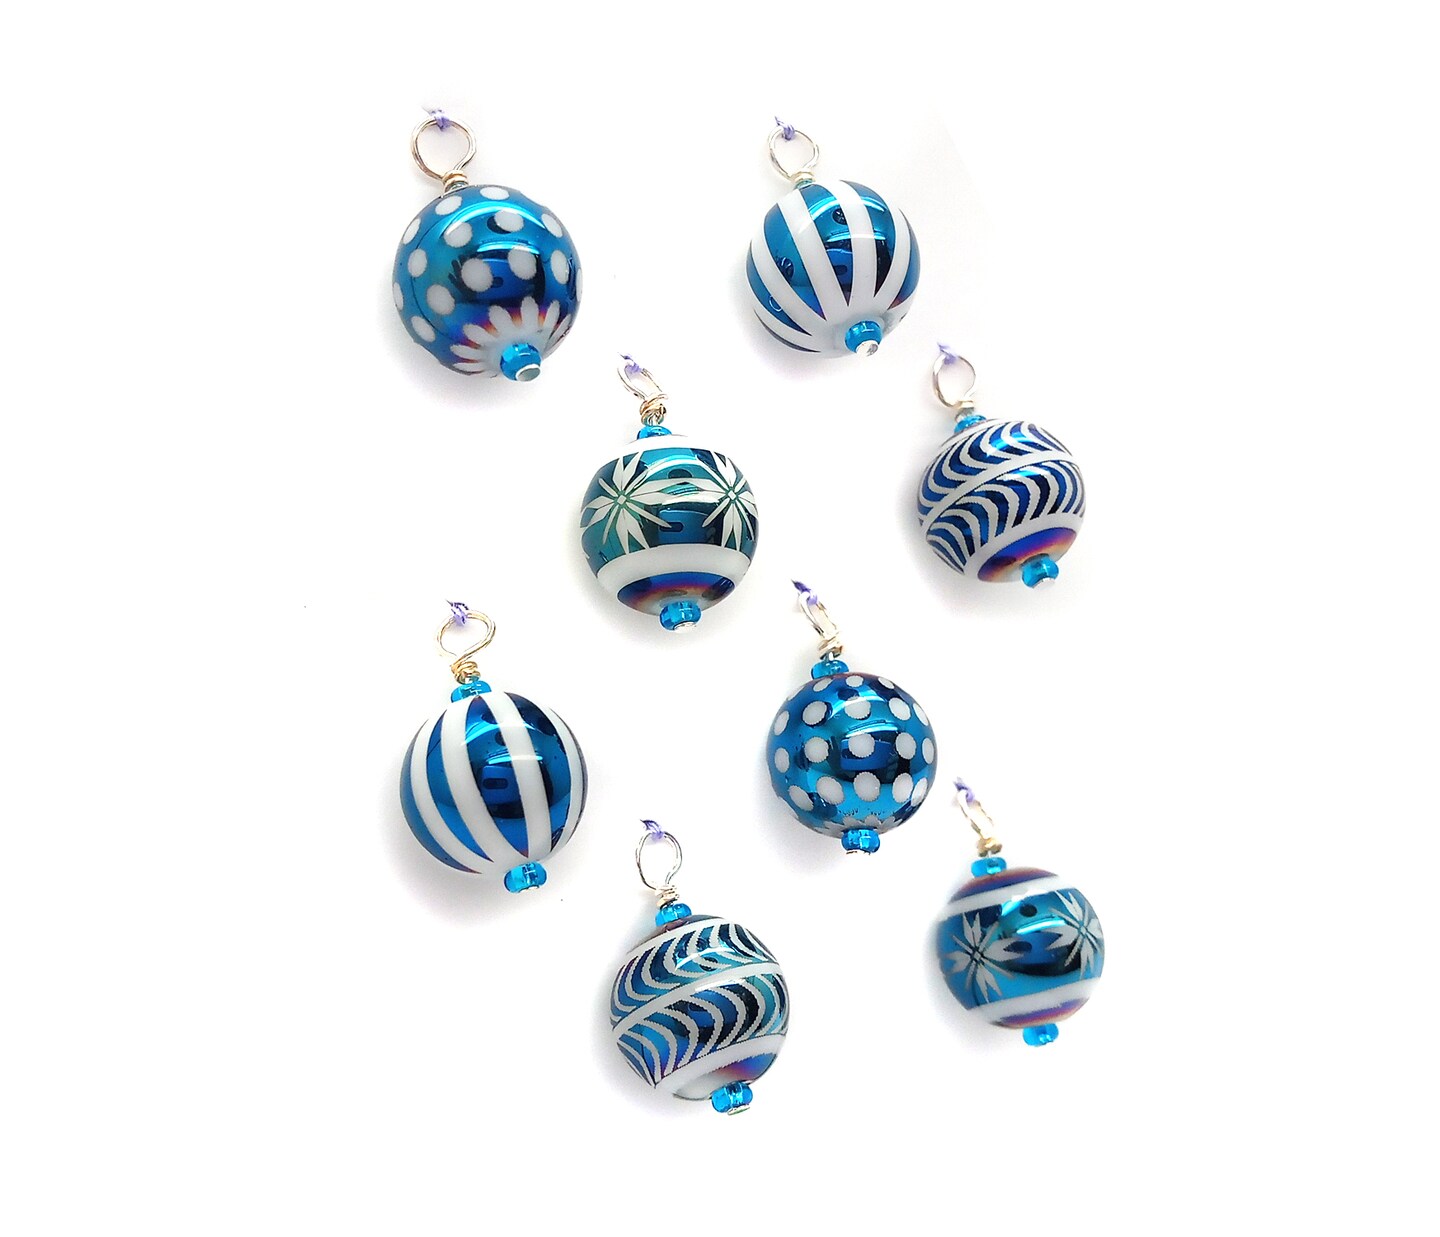 Miniature Christmas Tree Ornaments in Blue Glass, 8 pieces with Hooks, Adorabilities